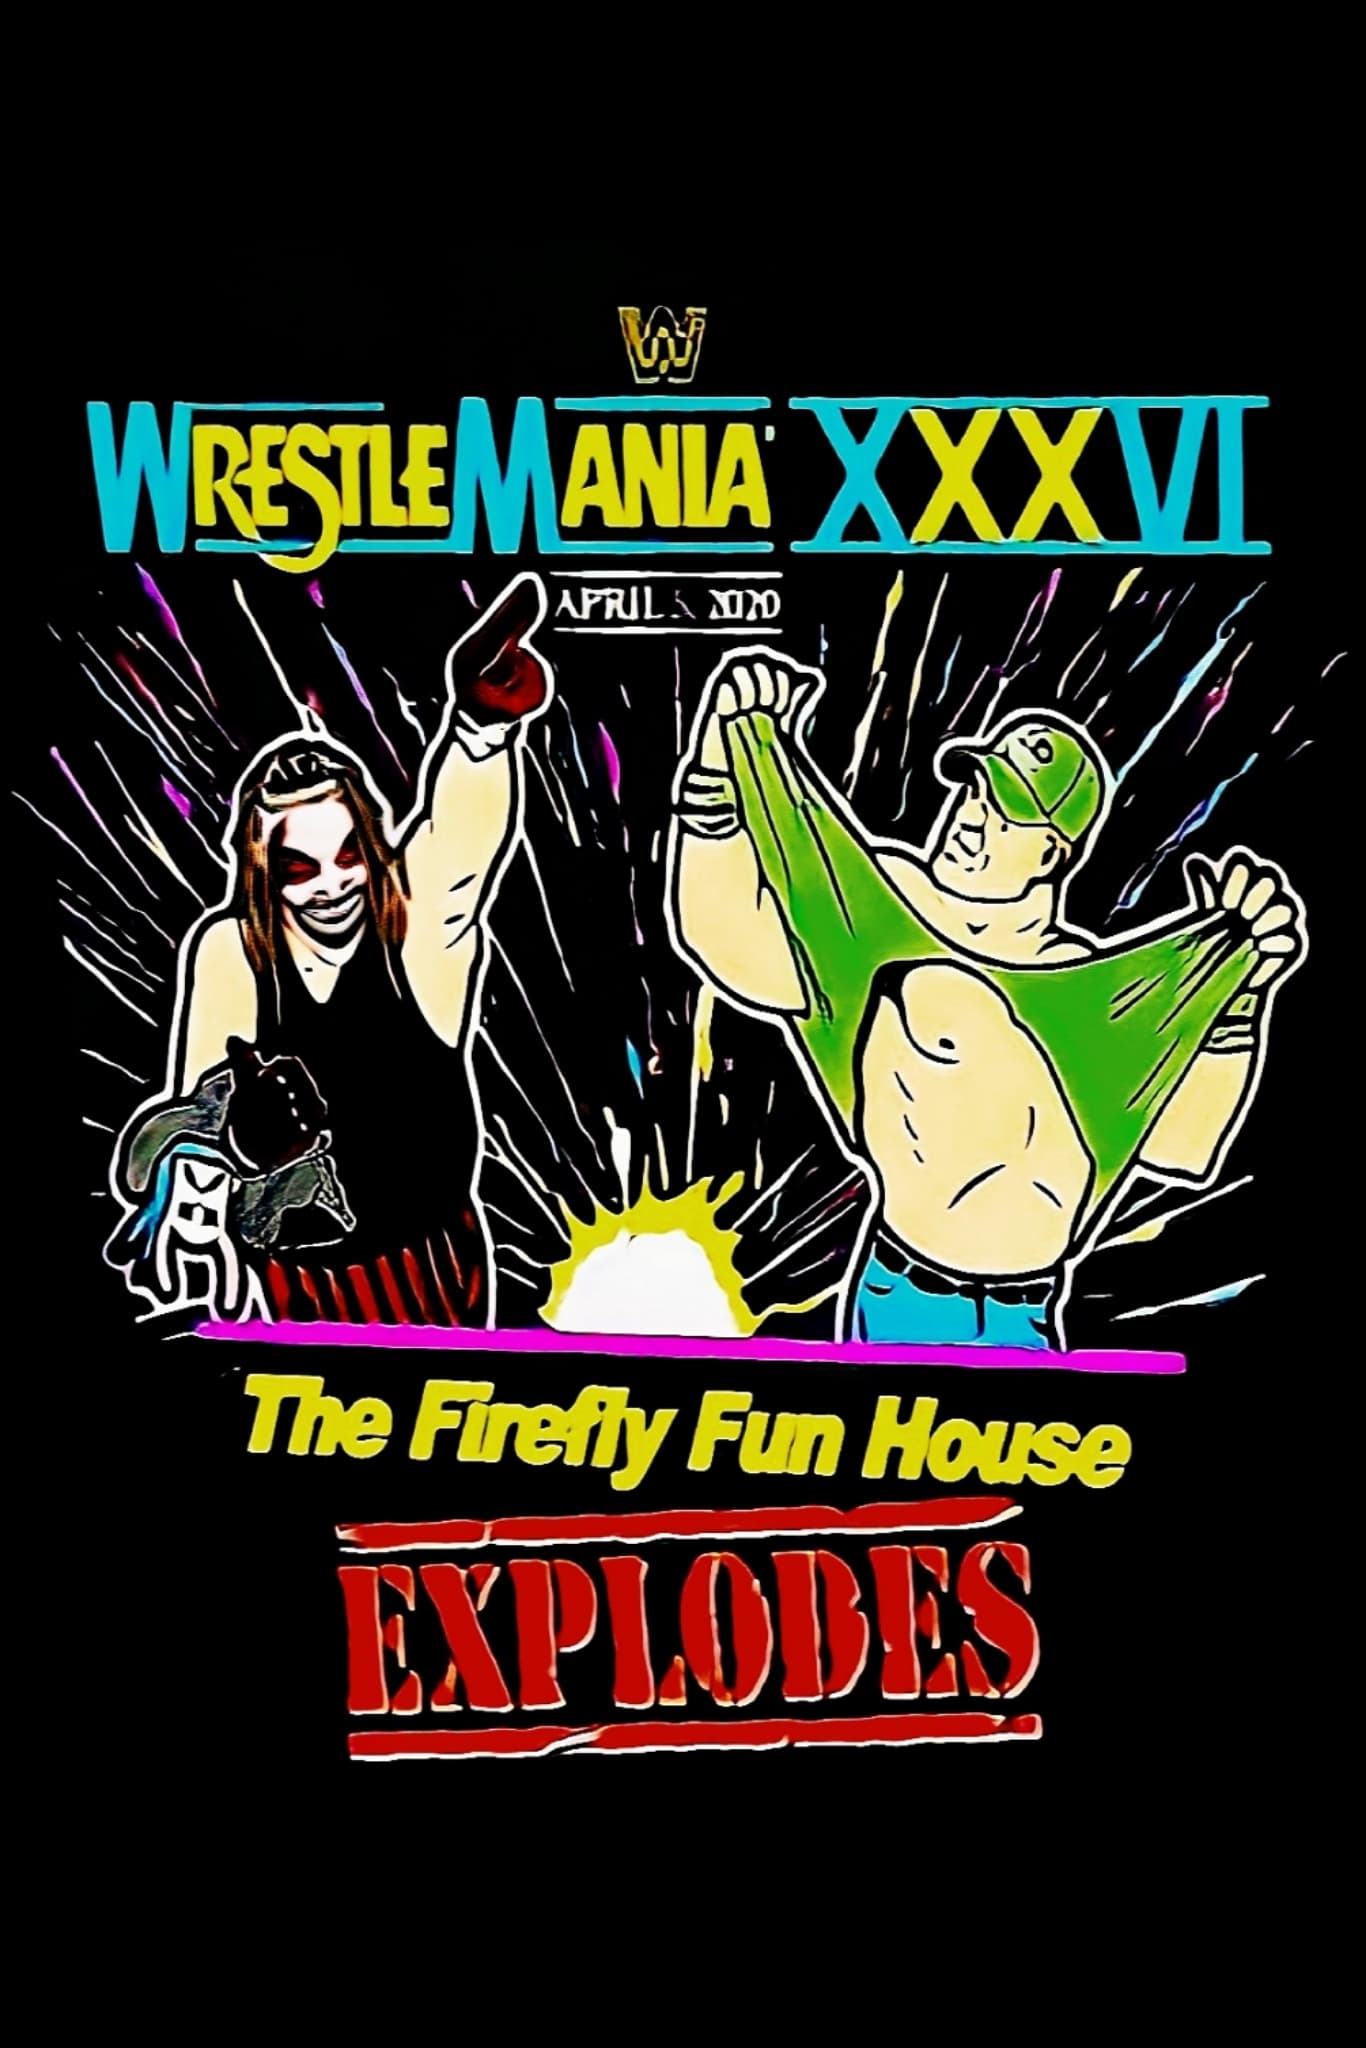 The Firefly Funhouse Match